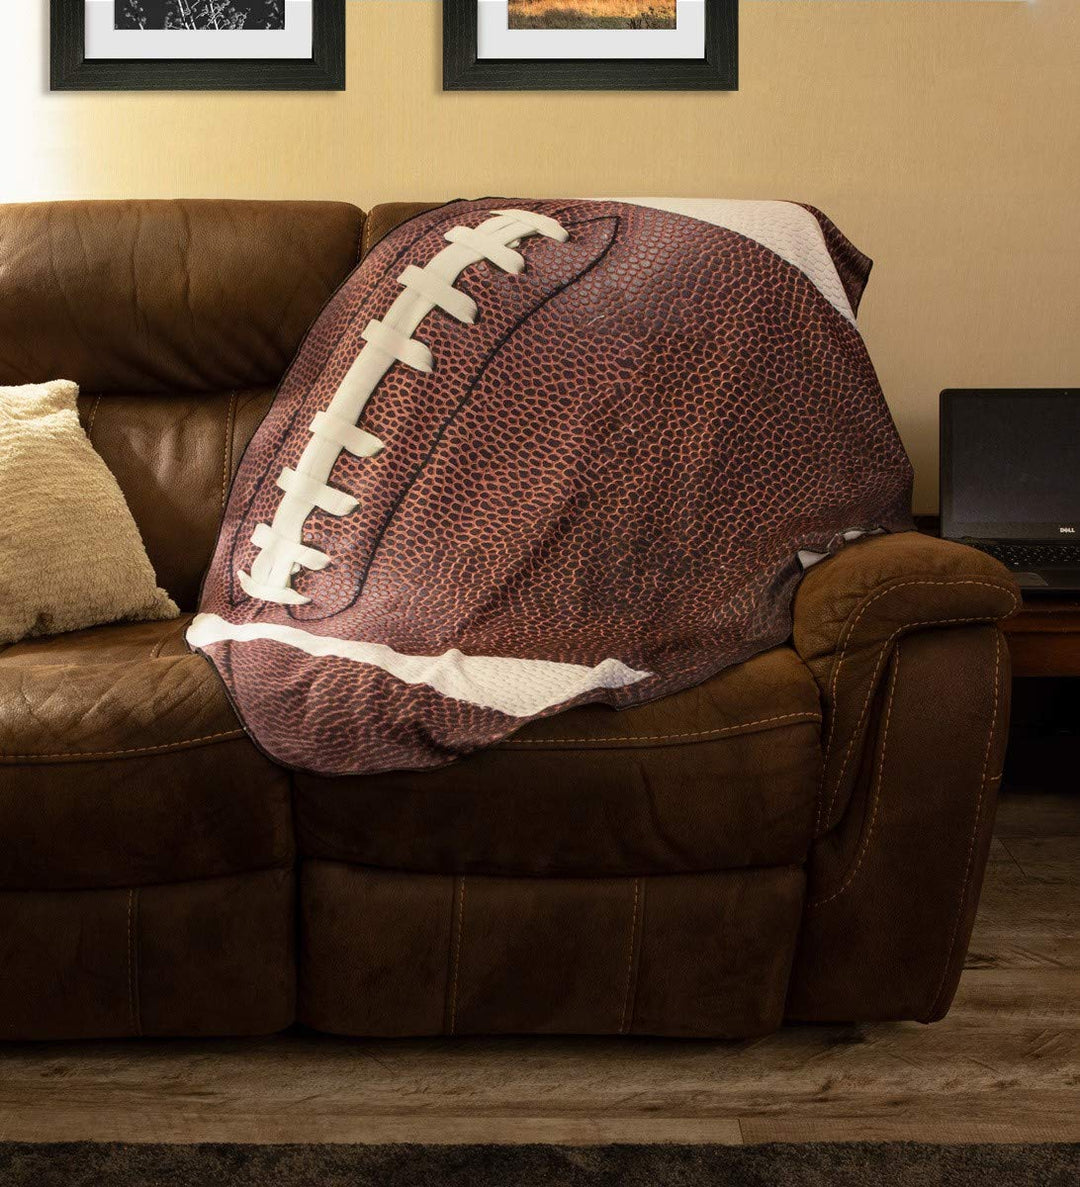 Realistic Football Blanket Shown on Couch.